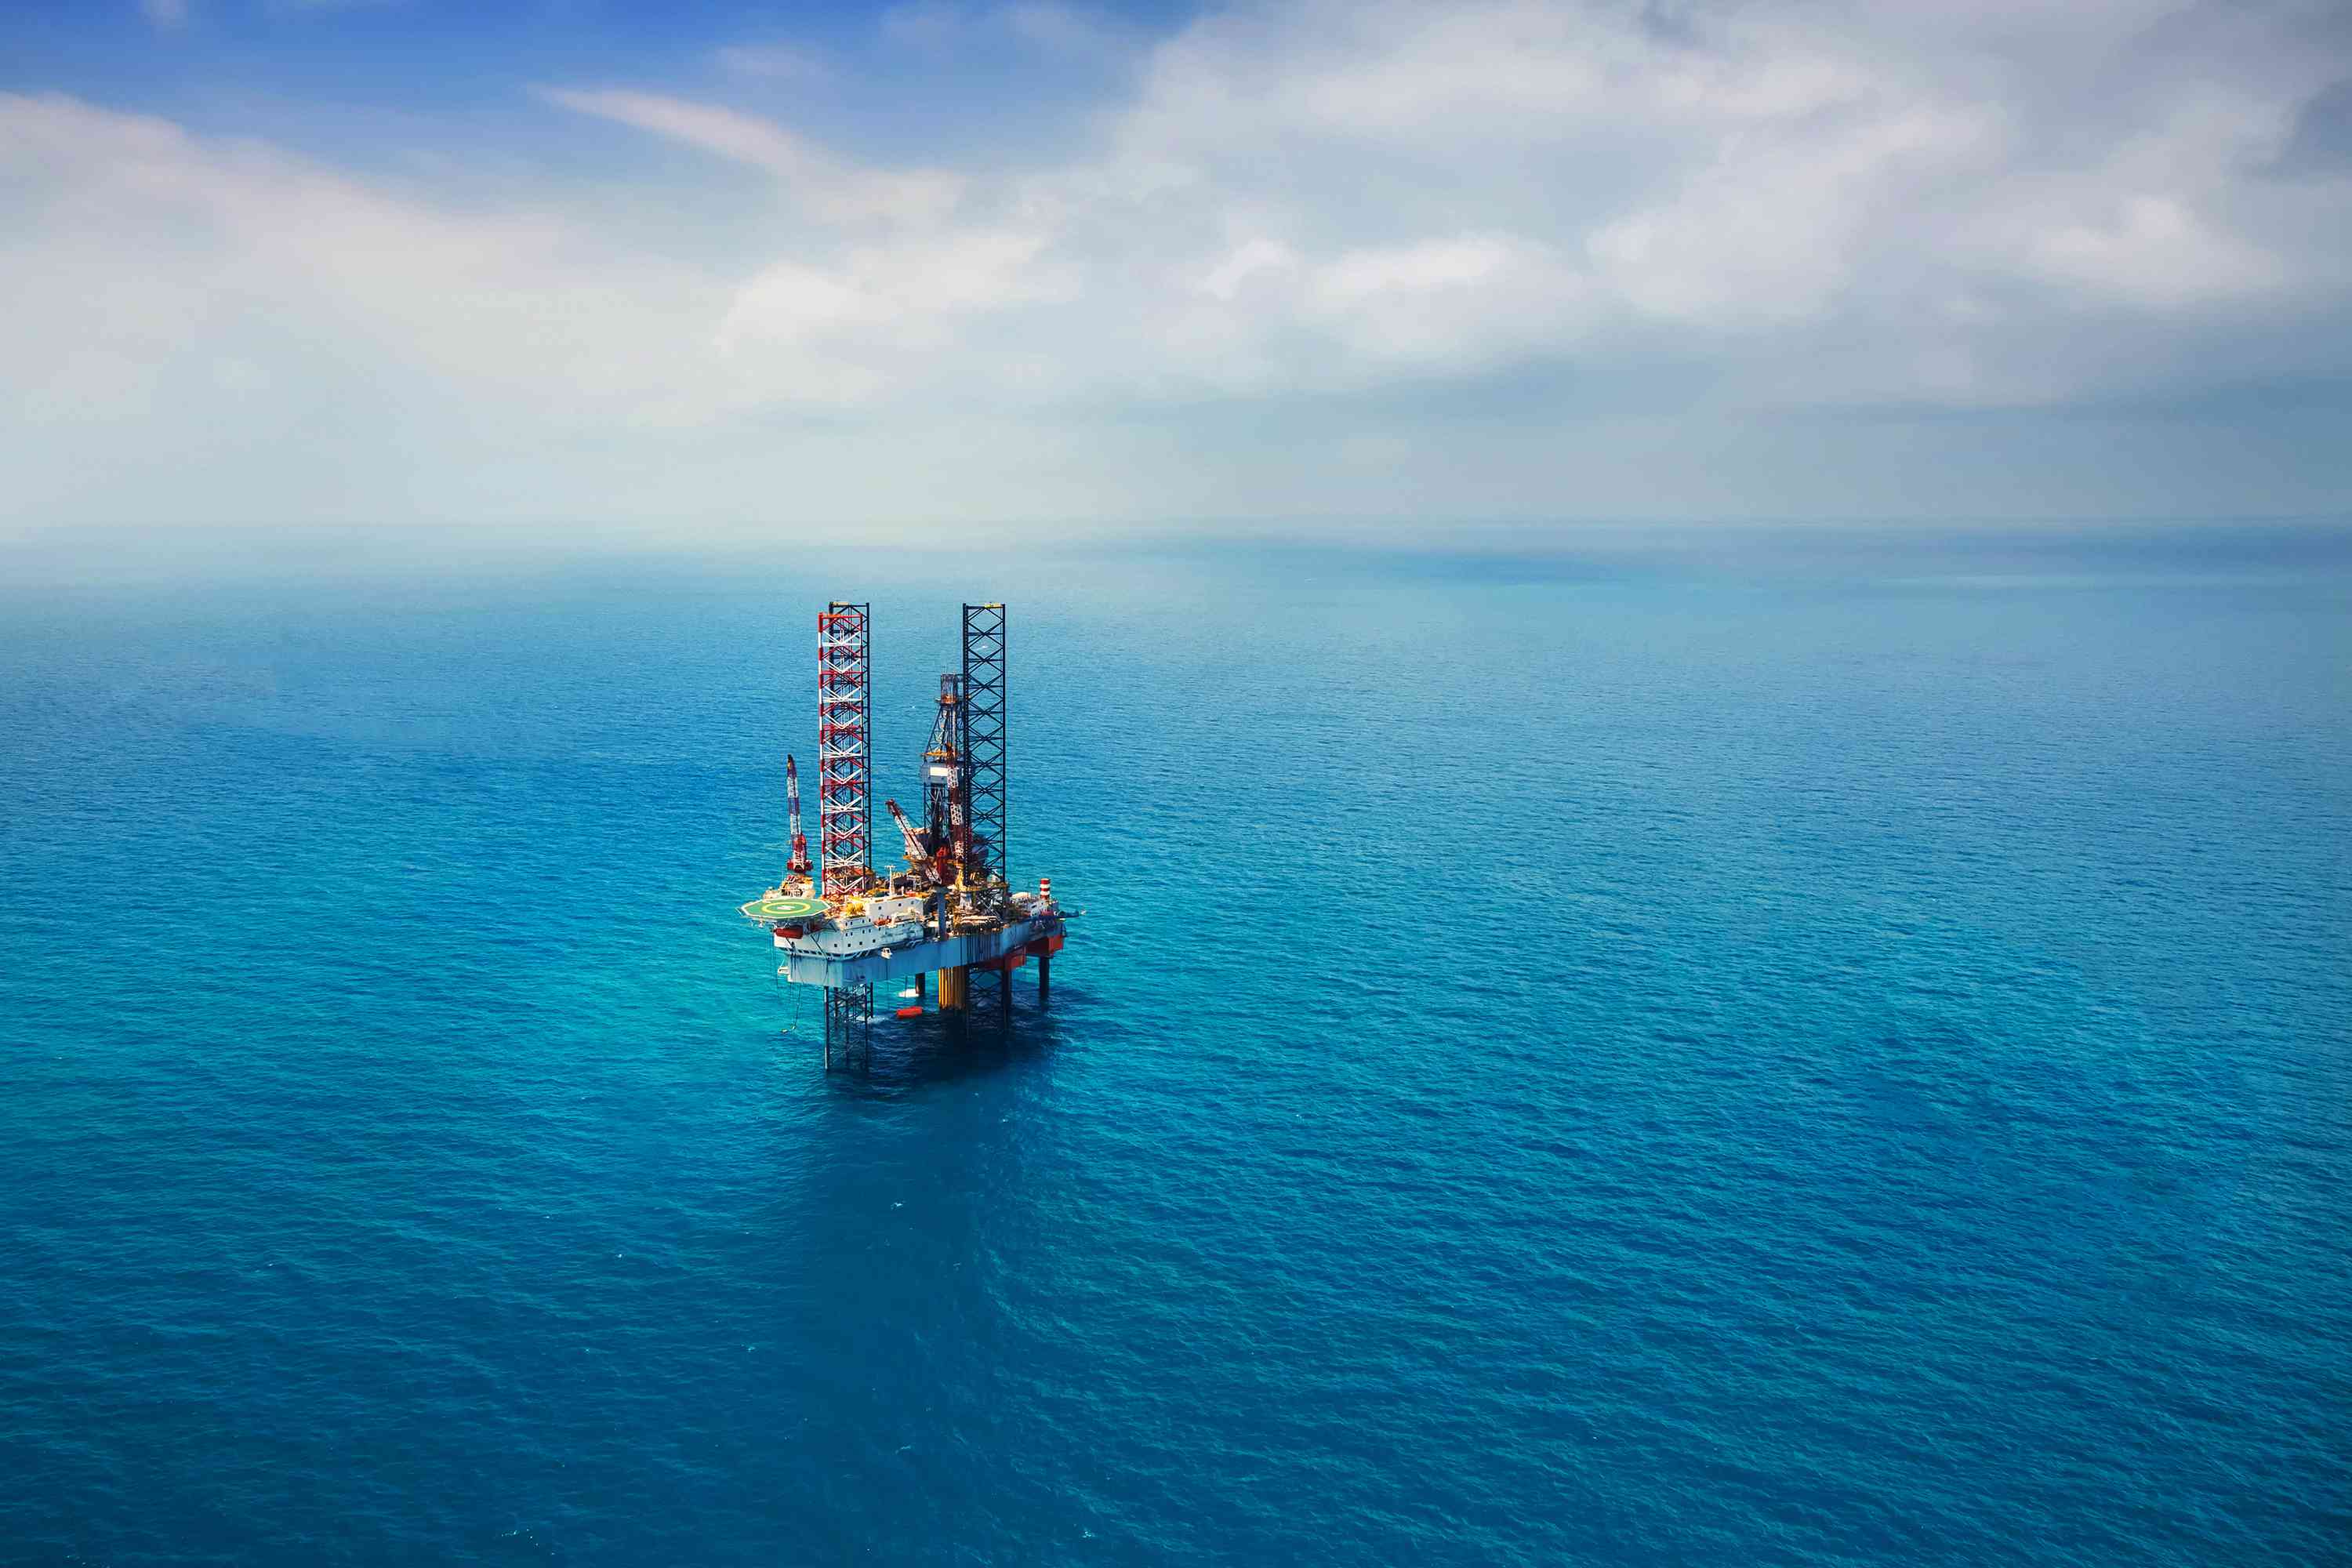 Offshore oil rig in the gulf